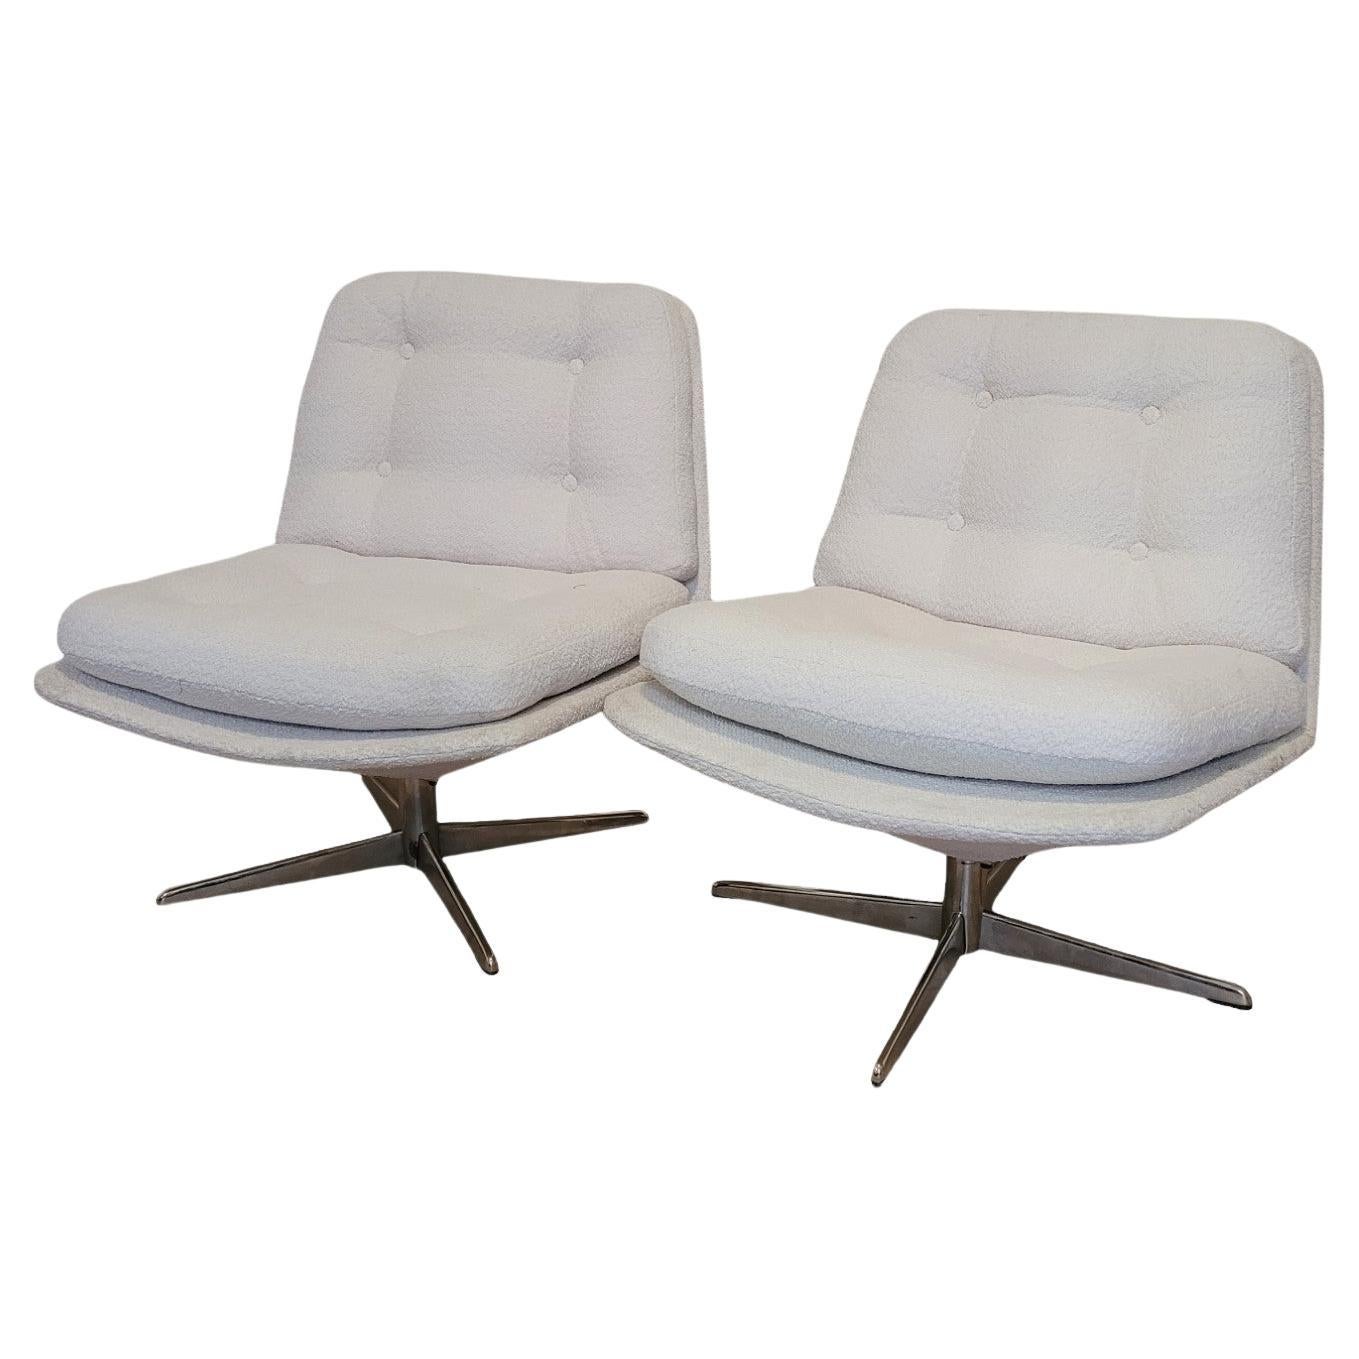 Pair Of Rotating Low Chairs, Bouclette Fabric, 20th Century